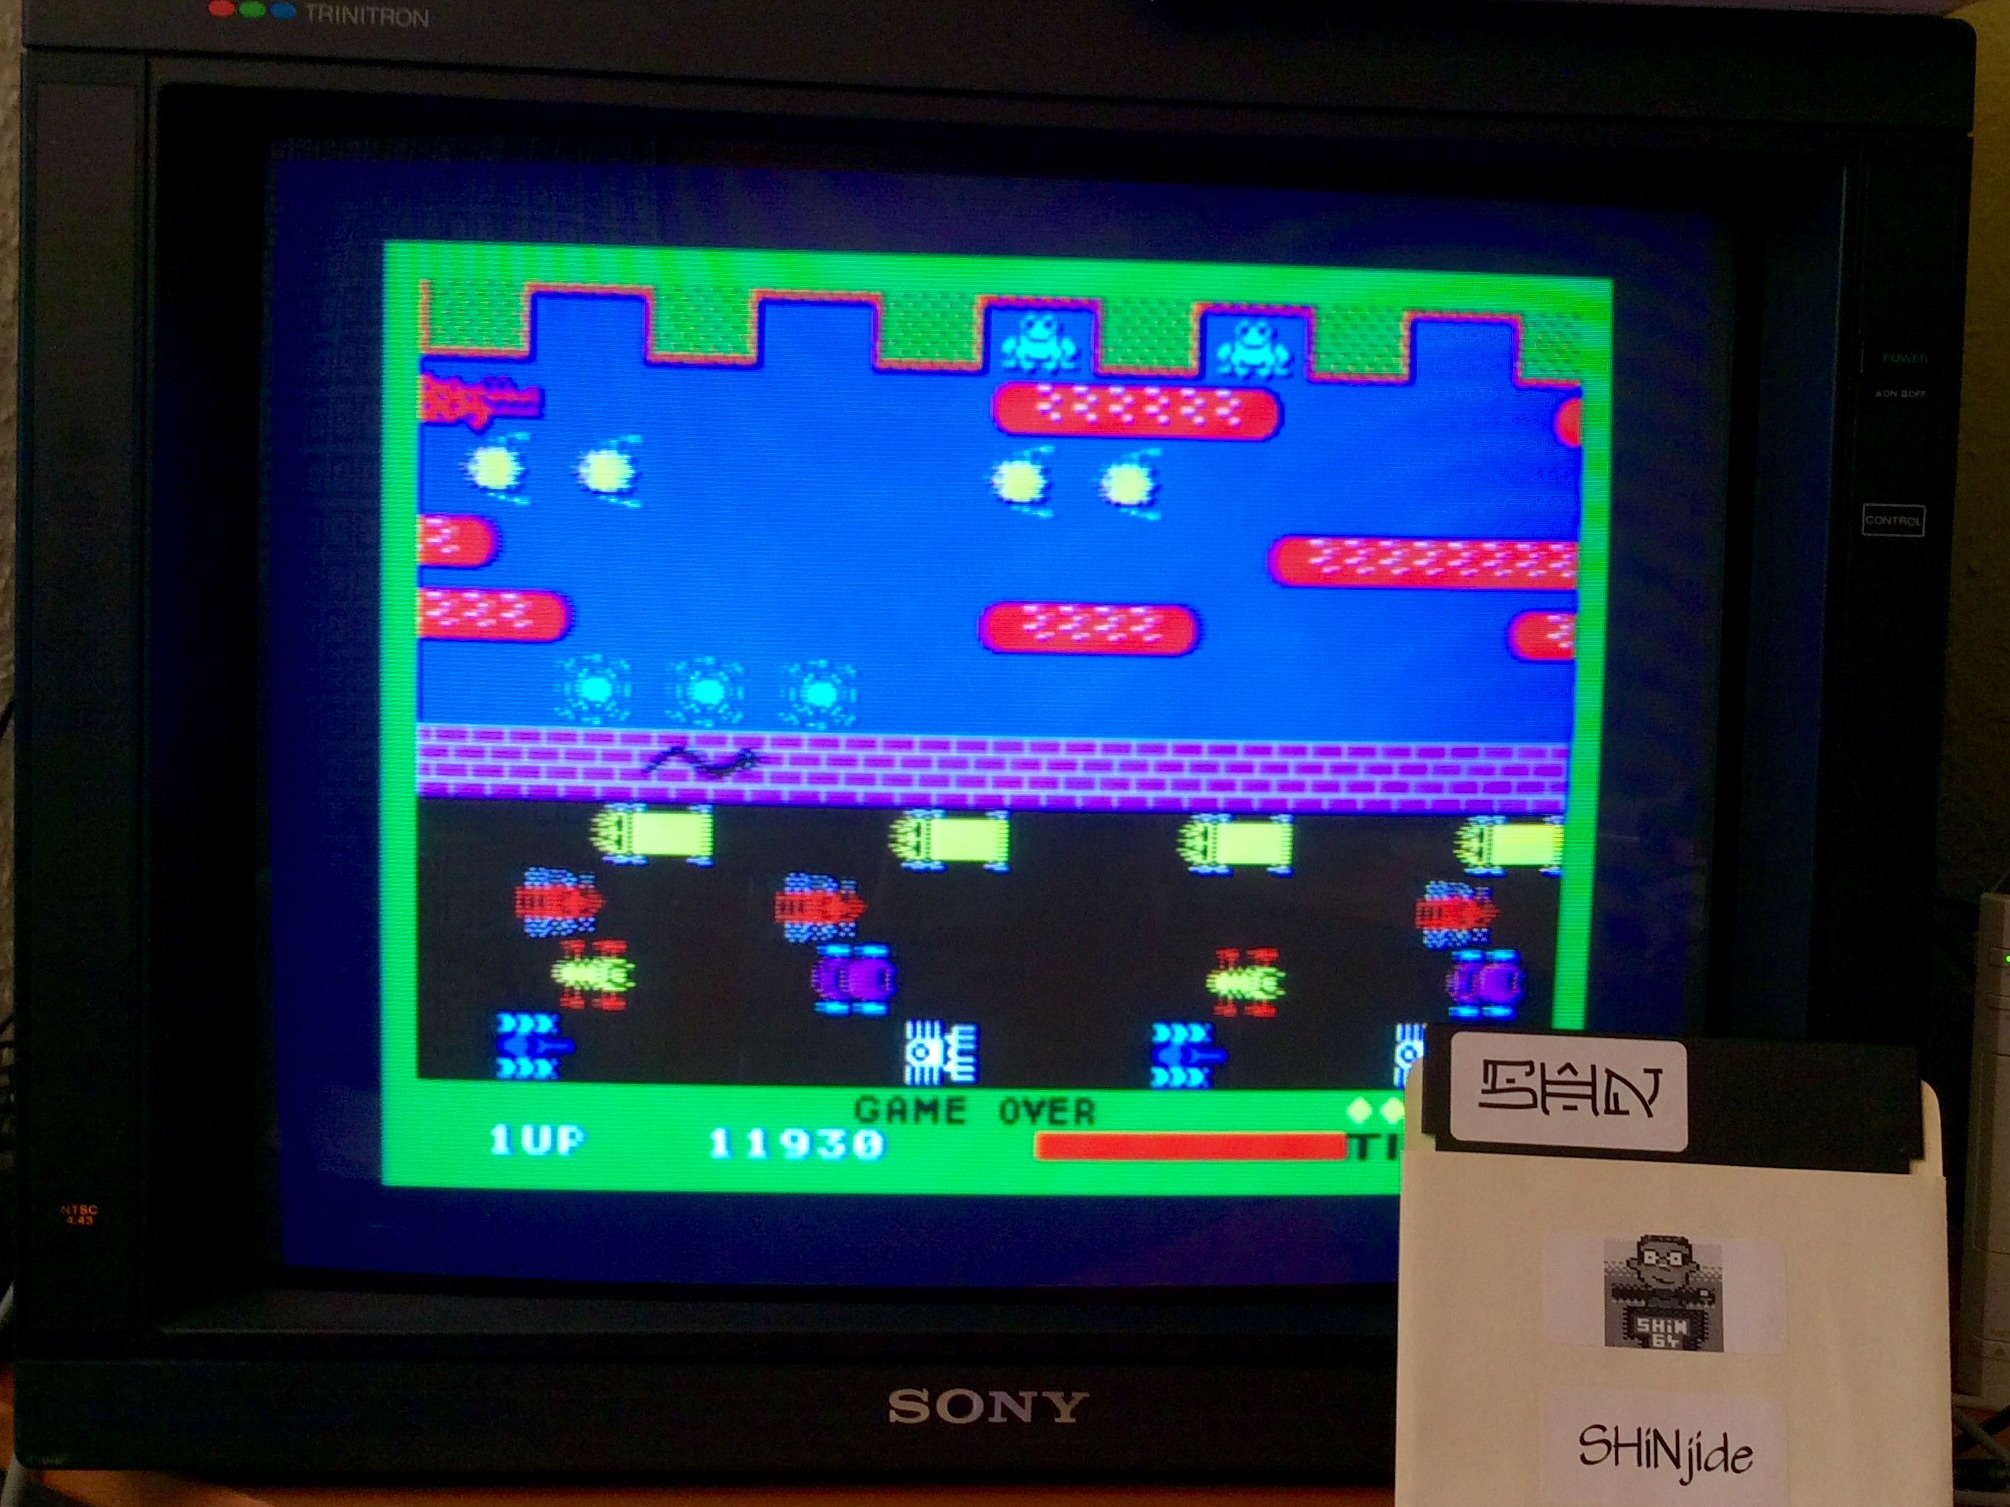 SHiNjide: Frogger (Colecovision Emulated) 11,930 points on 2015-01-03 05:38:56